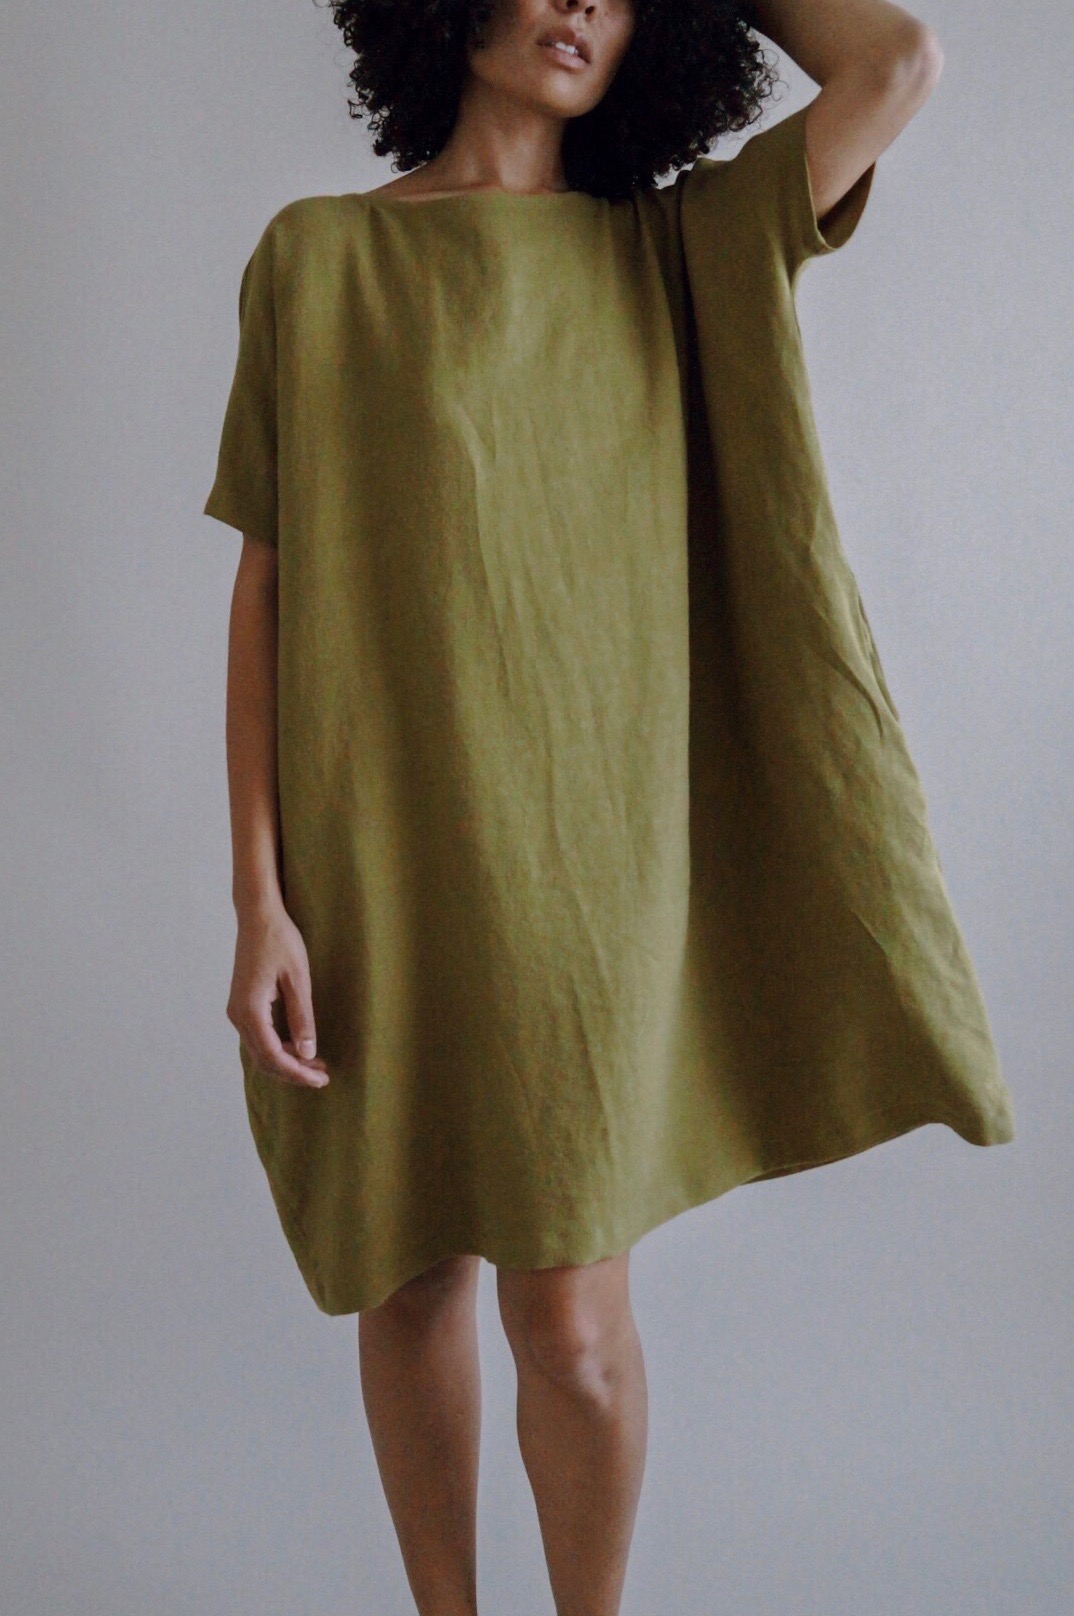 best sustainable basics - linen dress from two days off clothing